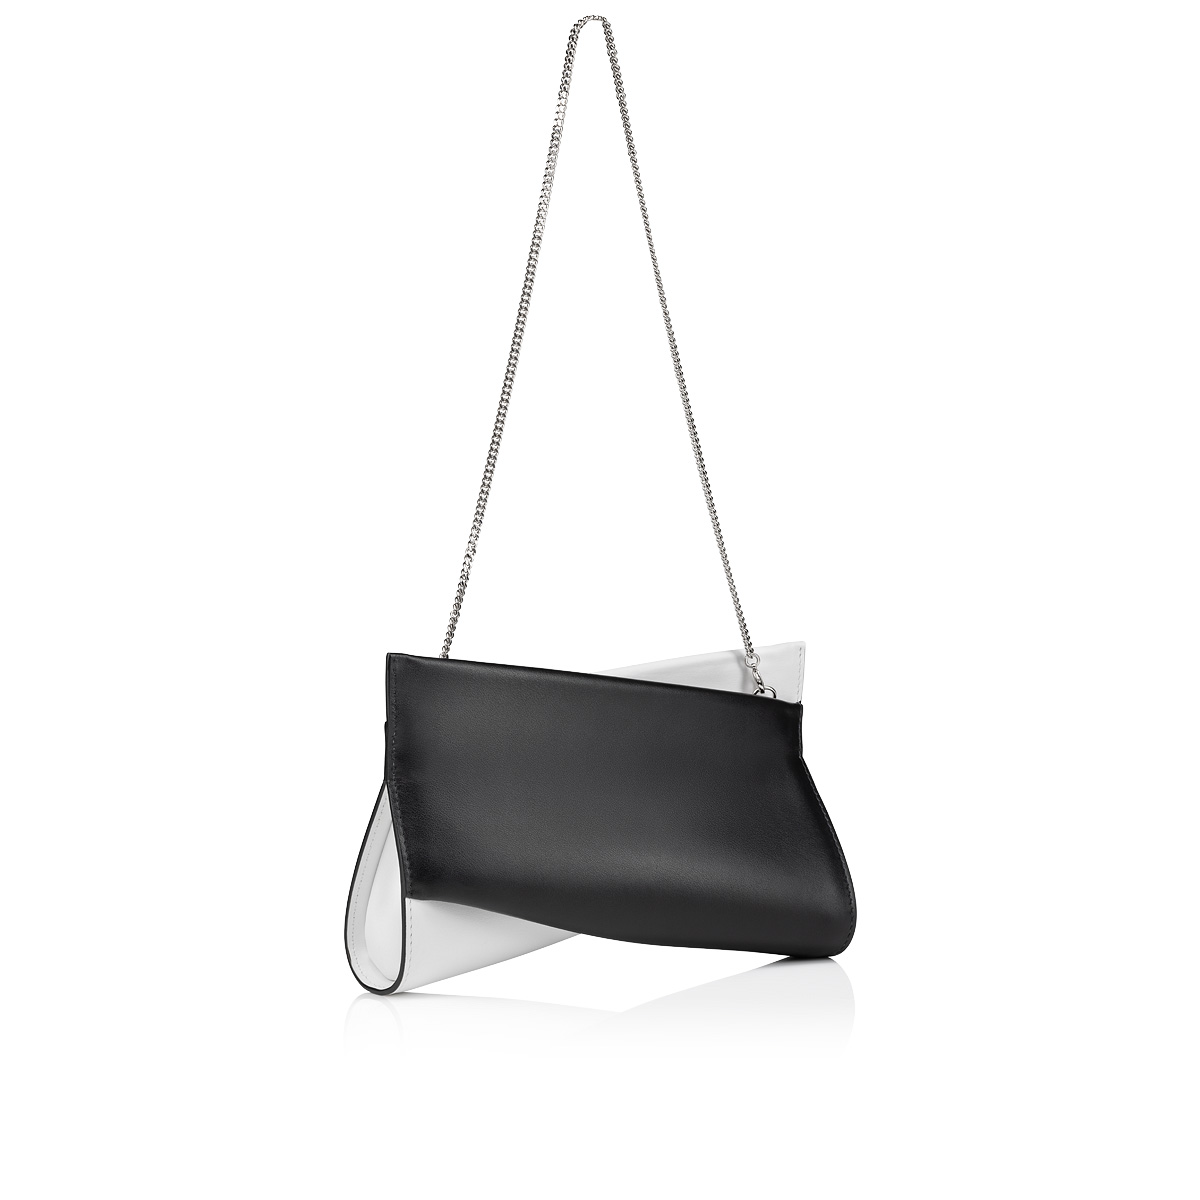 Loubitwist Small Patent Leather Clutch in Black - Christian Louboutin